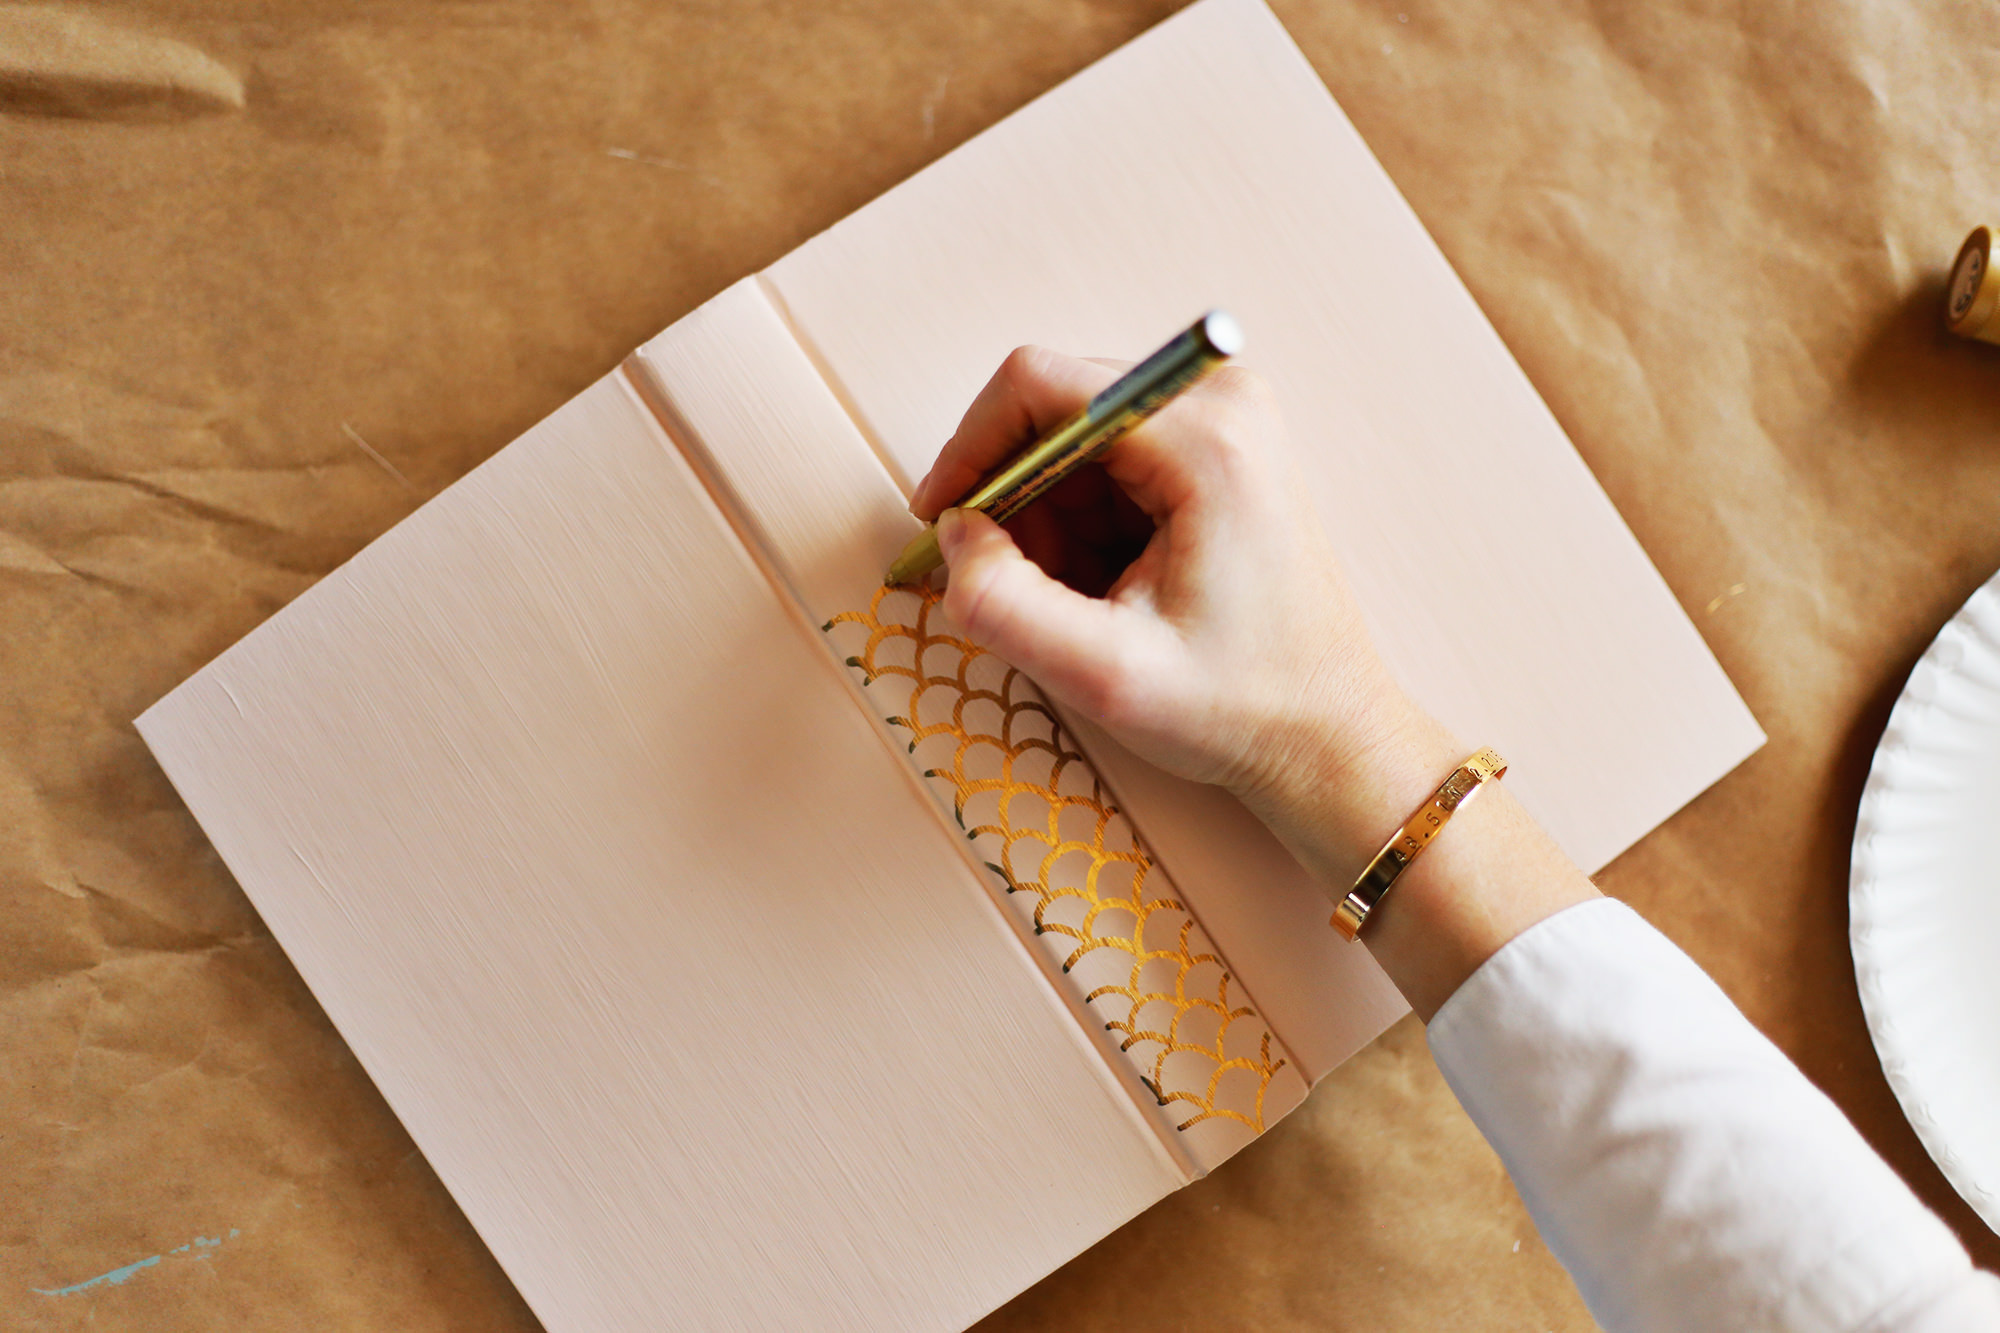 Recycle old, unattractive books by painting them! Add classic detail to the spine with a gold paint pen.